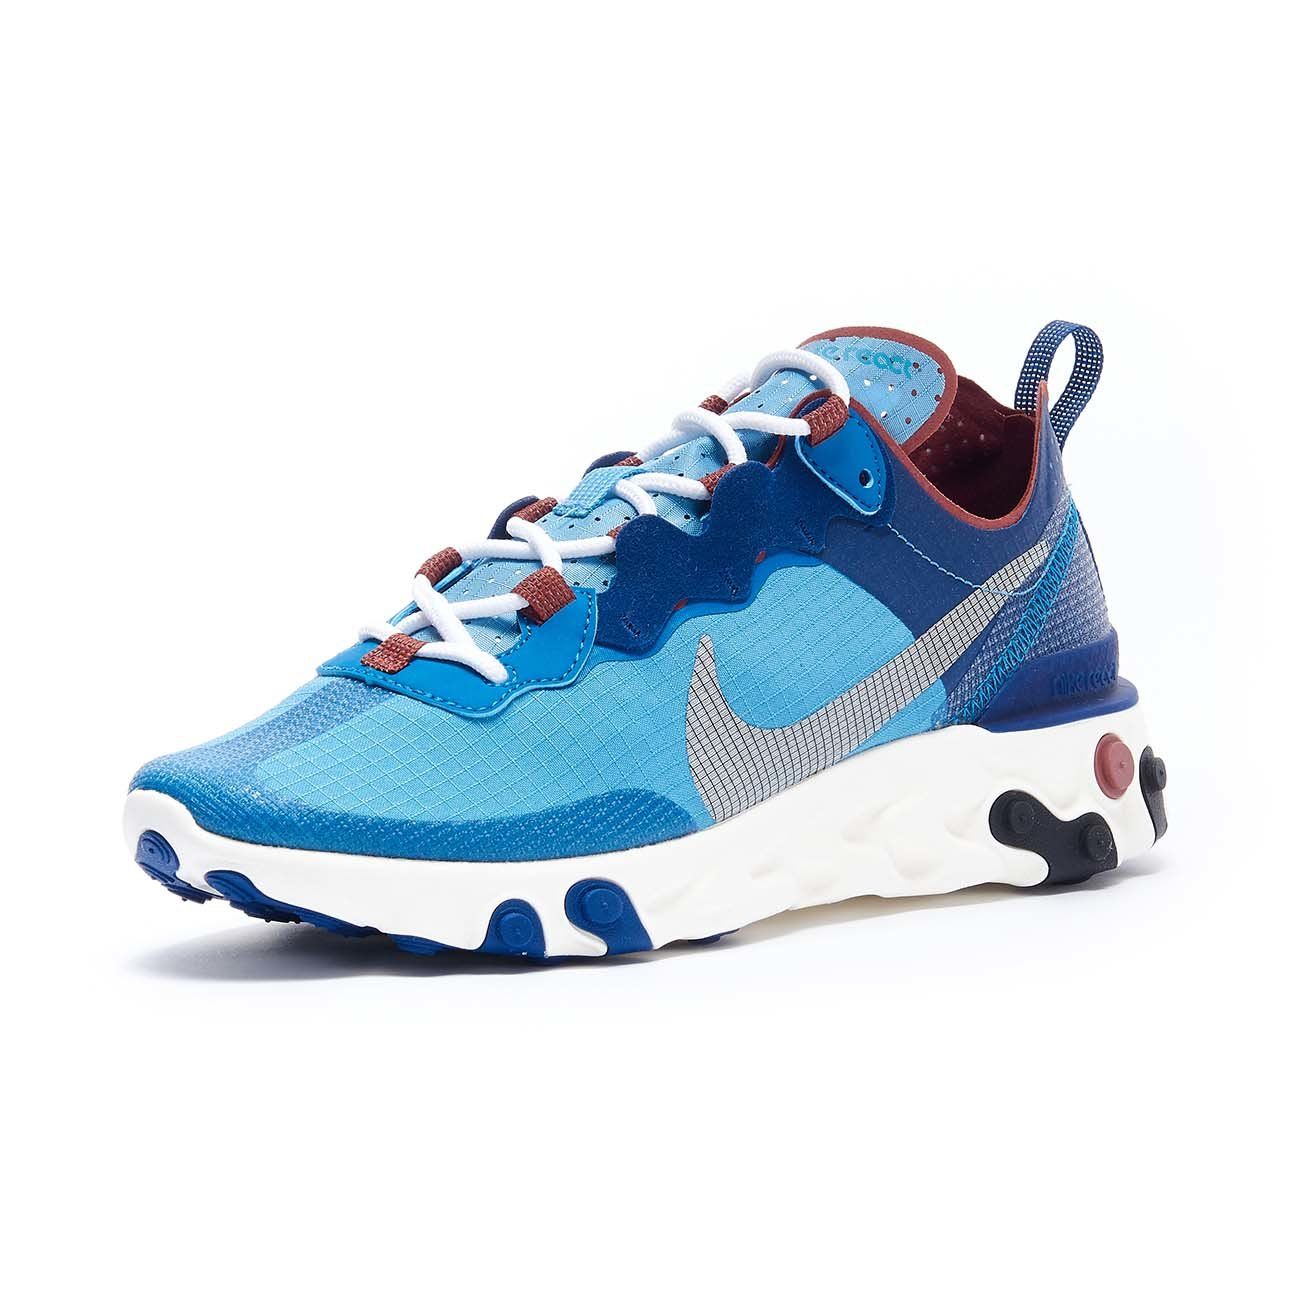 nike react element 55 white and blue